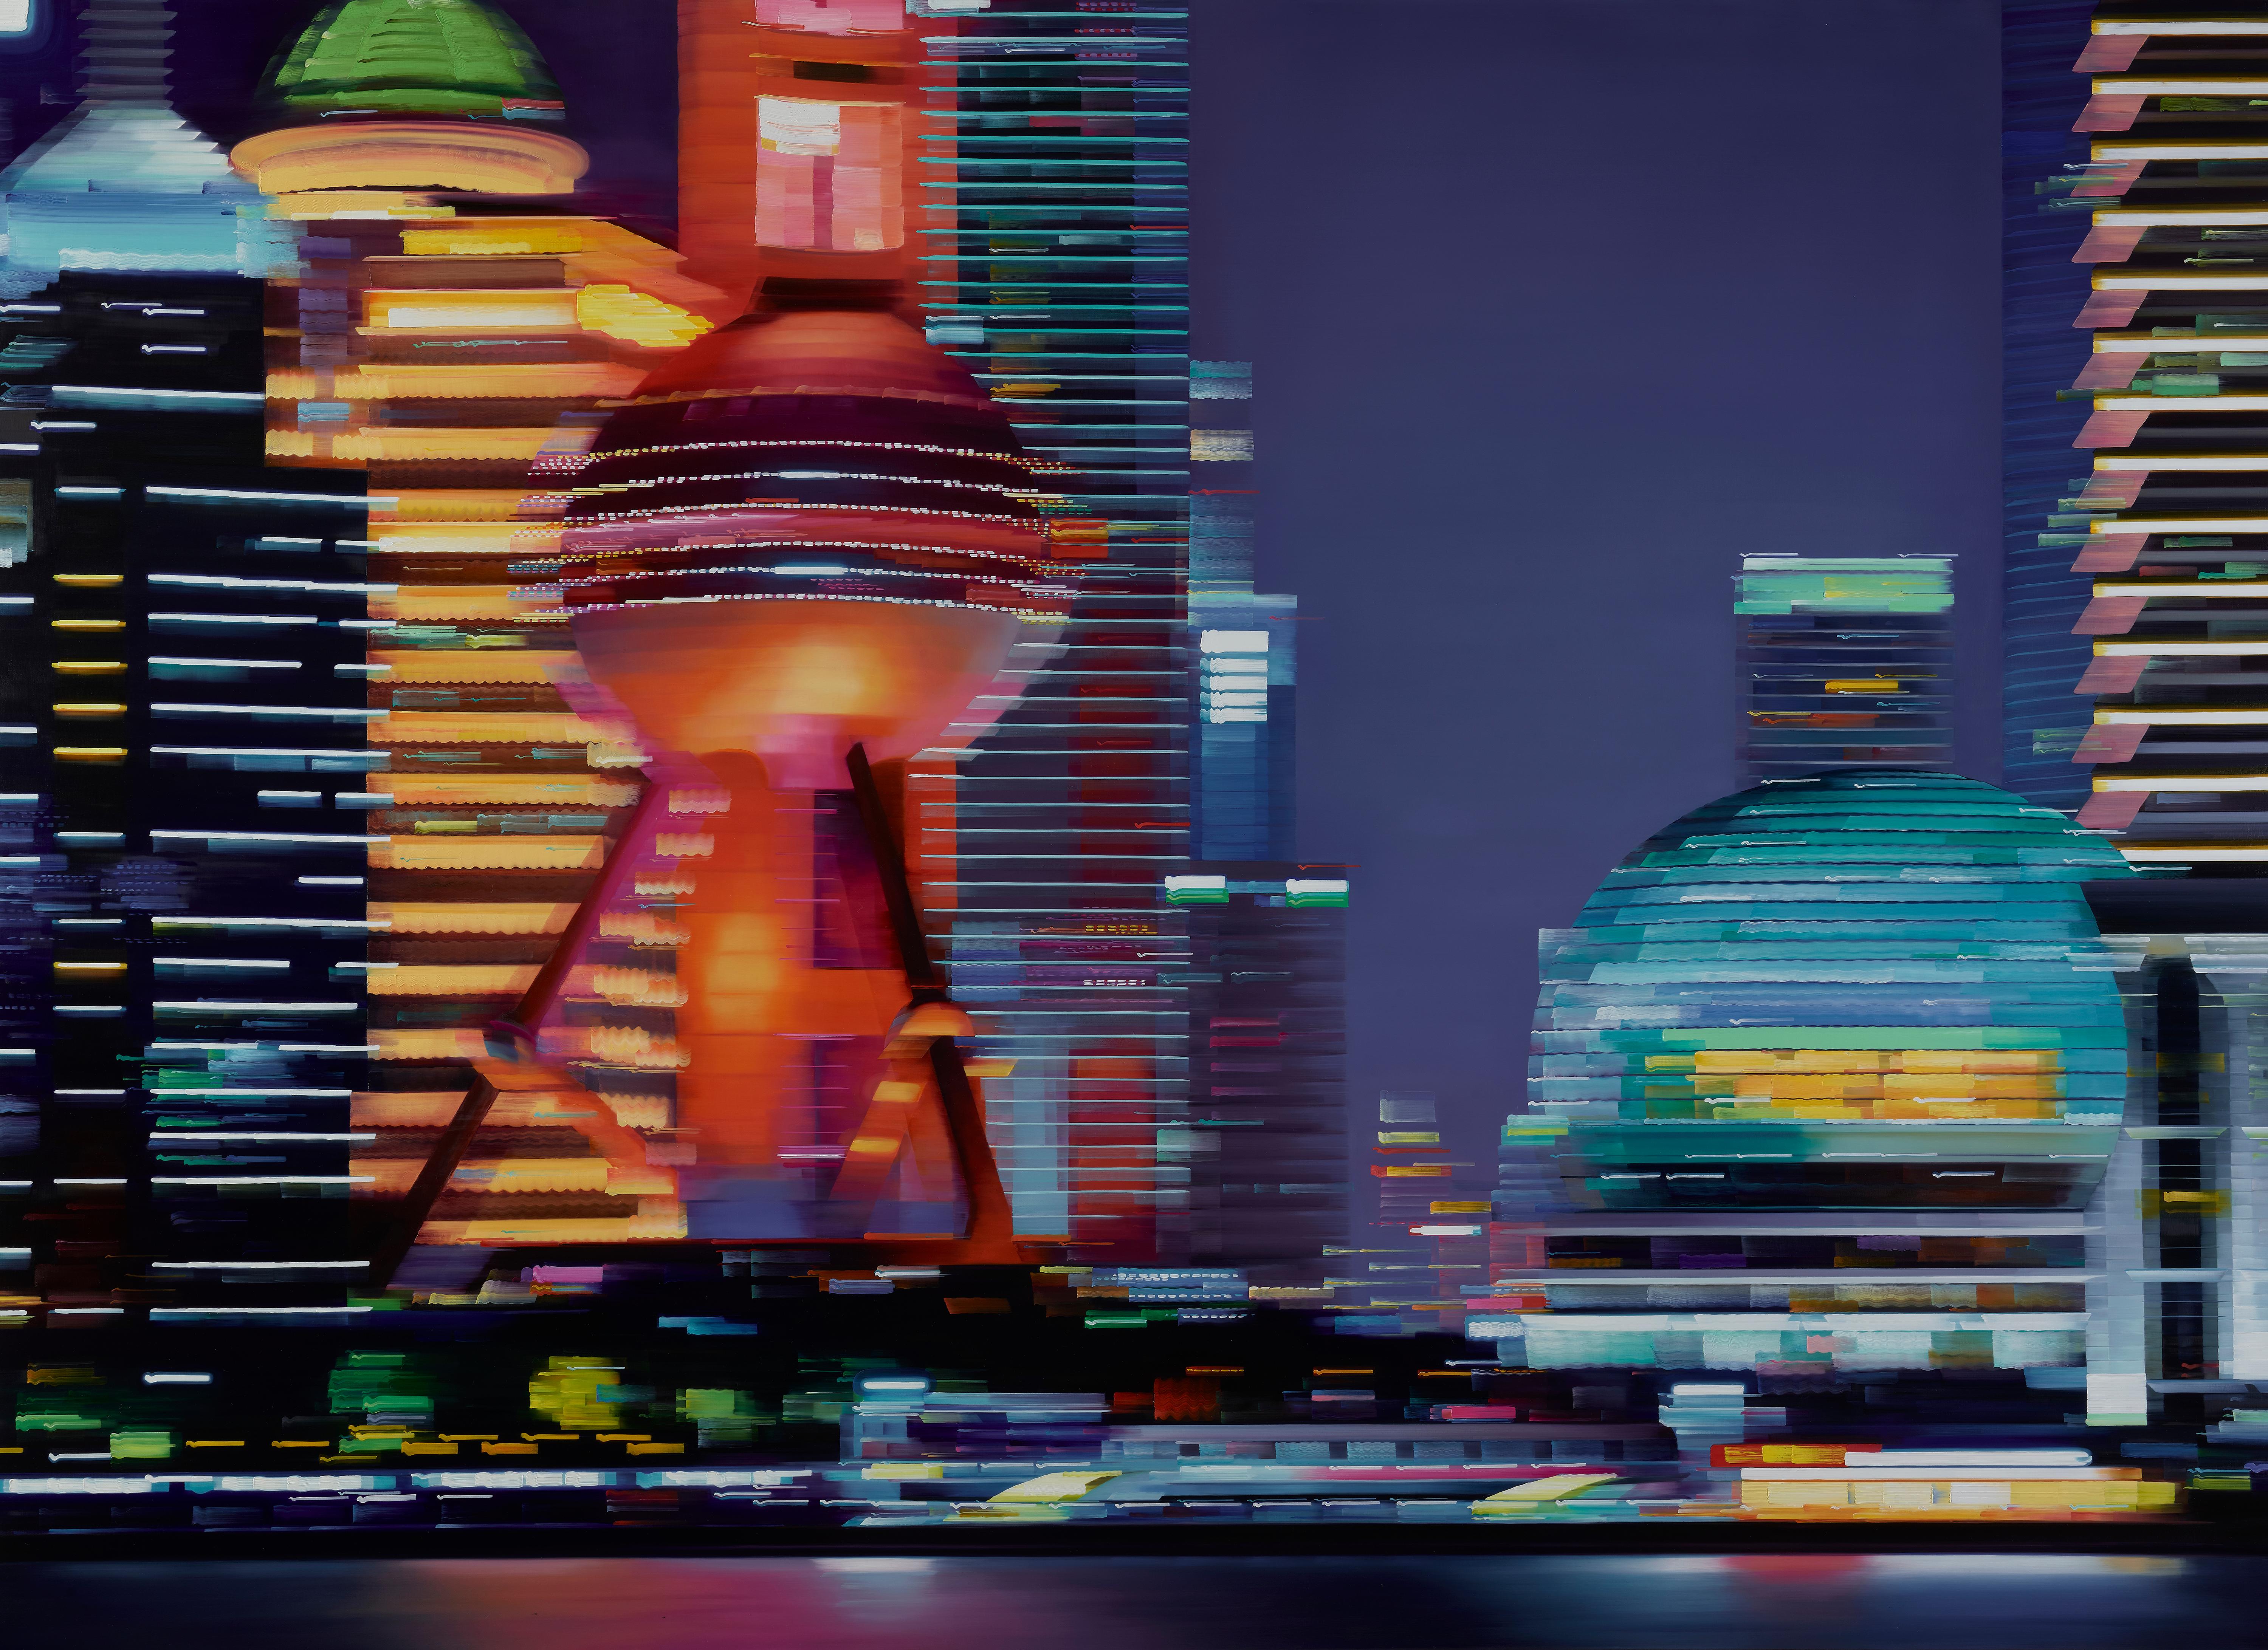 Alexandra Pacula Landscape Painting - ENTRANCING PUDONG, China City Oil Painting, Electric, Neon, Futuristic